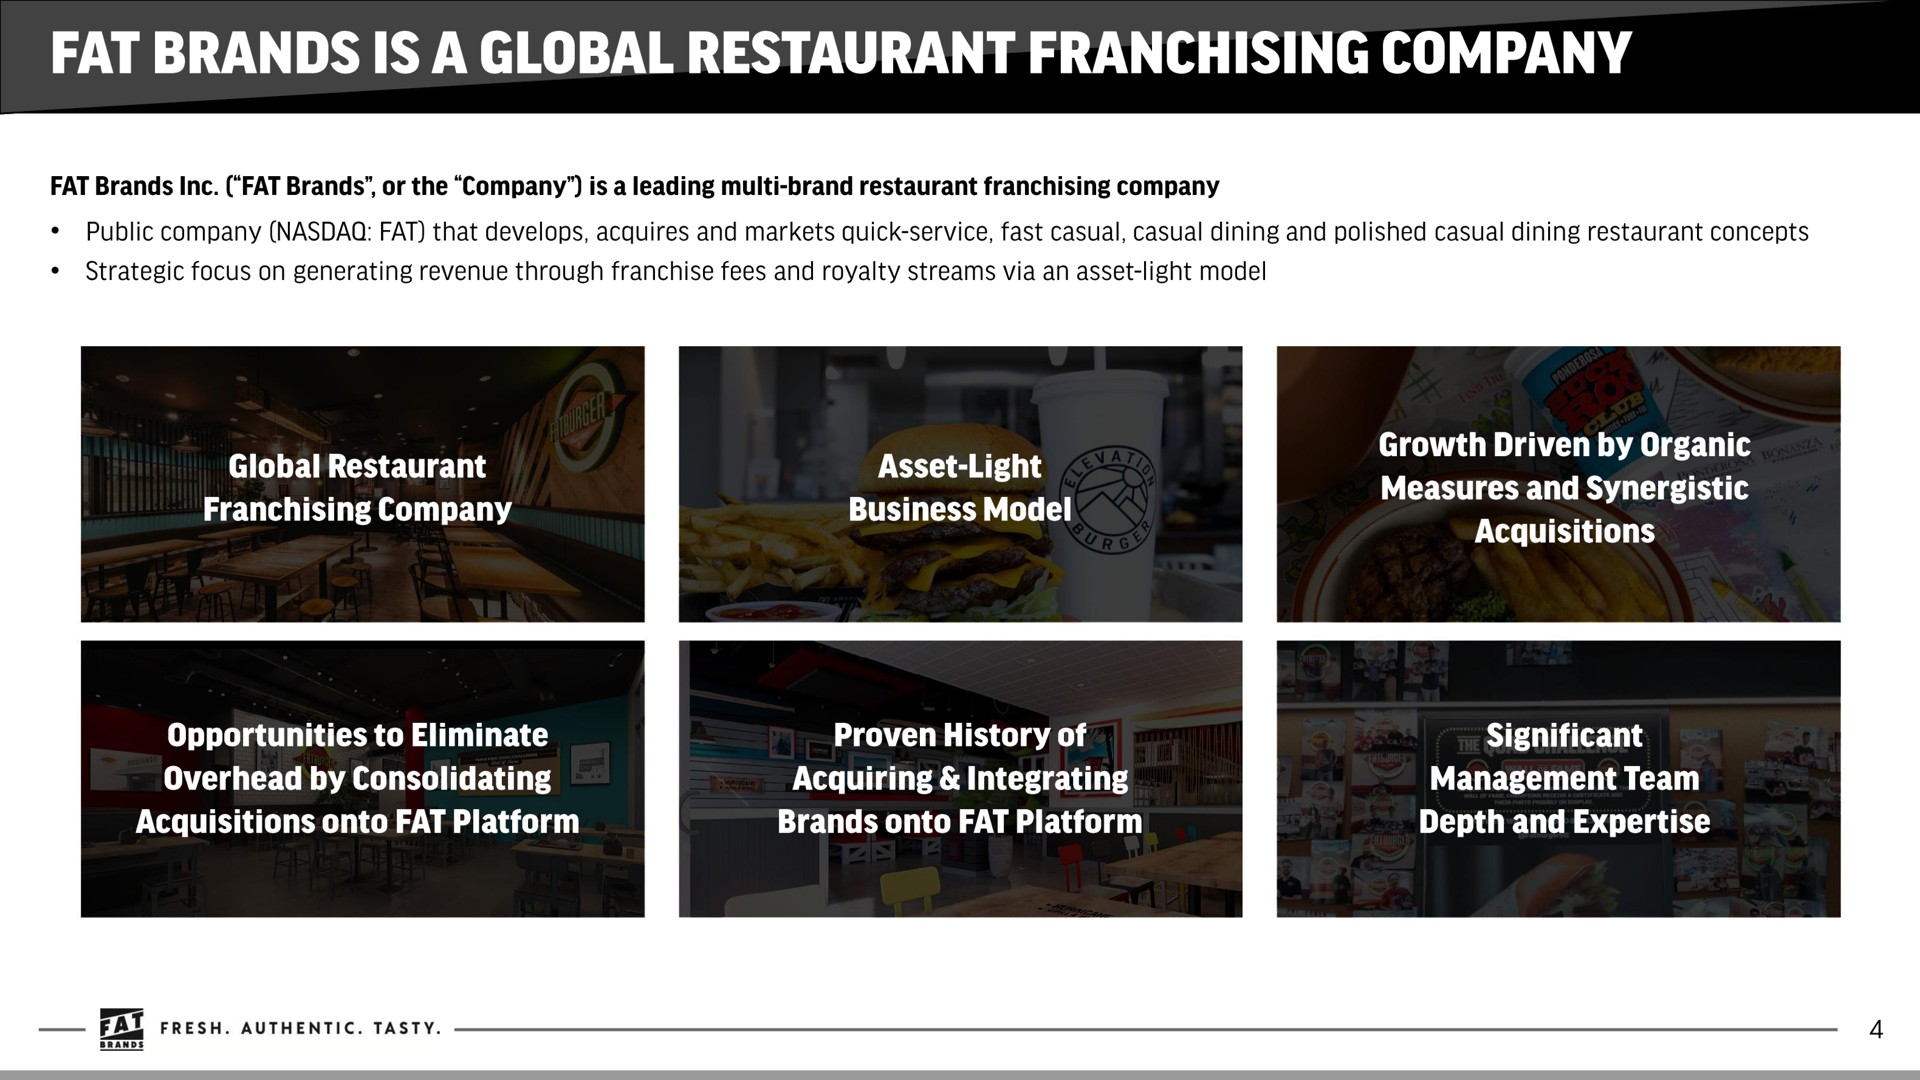 fat brands is a global restaurant franchising company | FAT Brands